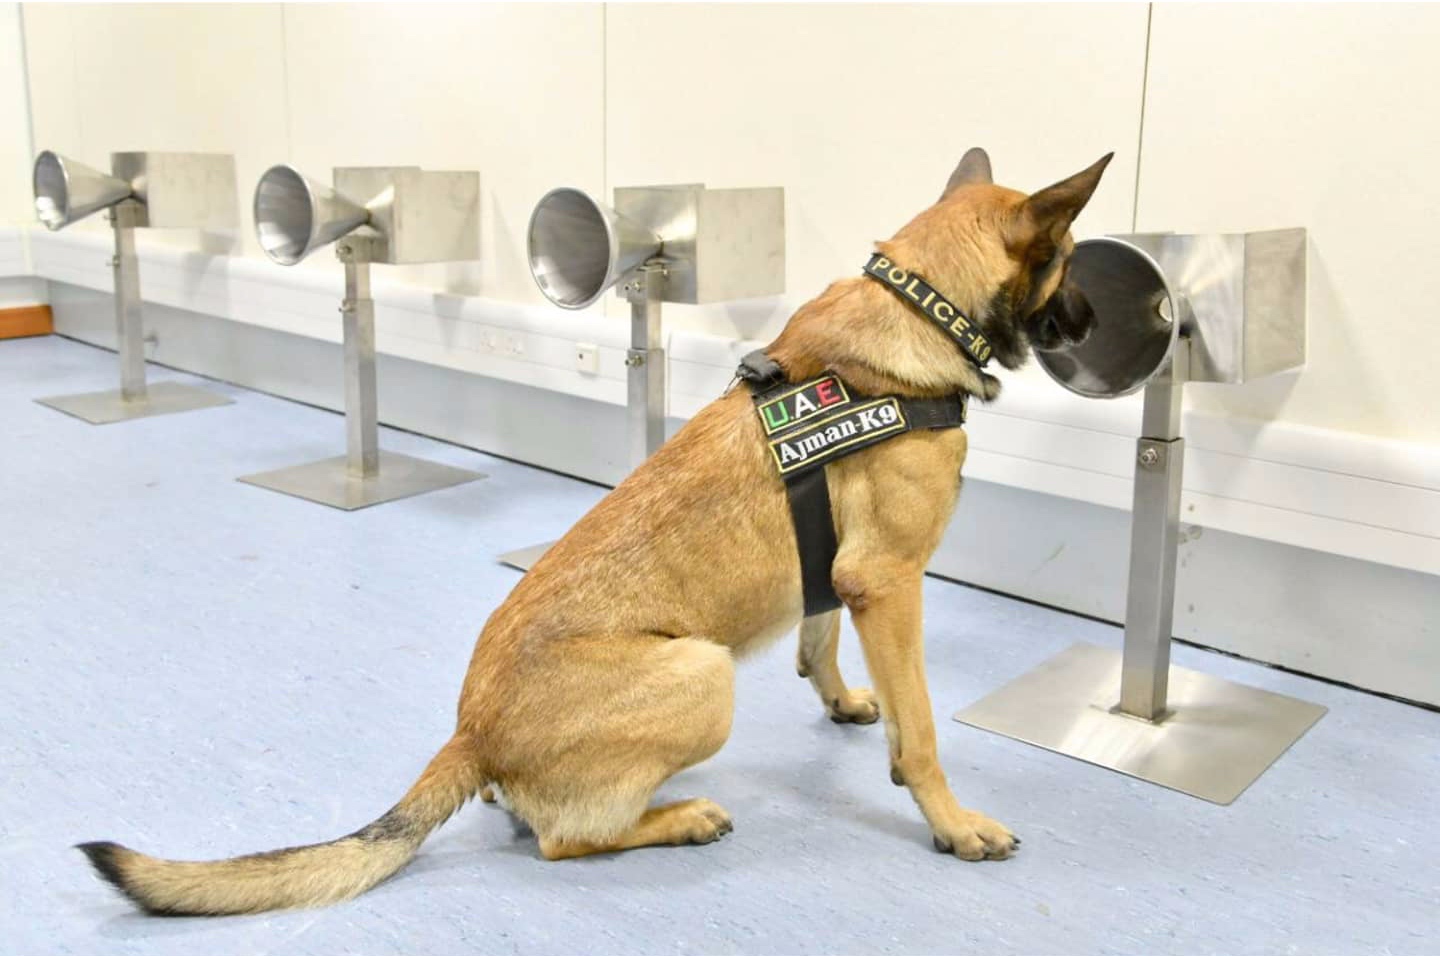 Police dog doing the test